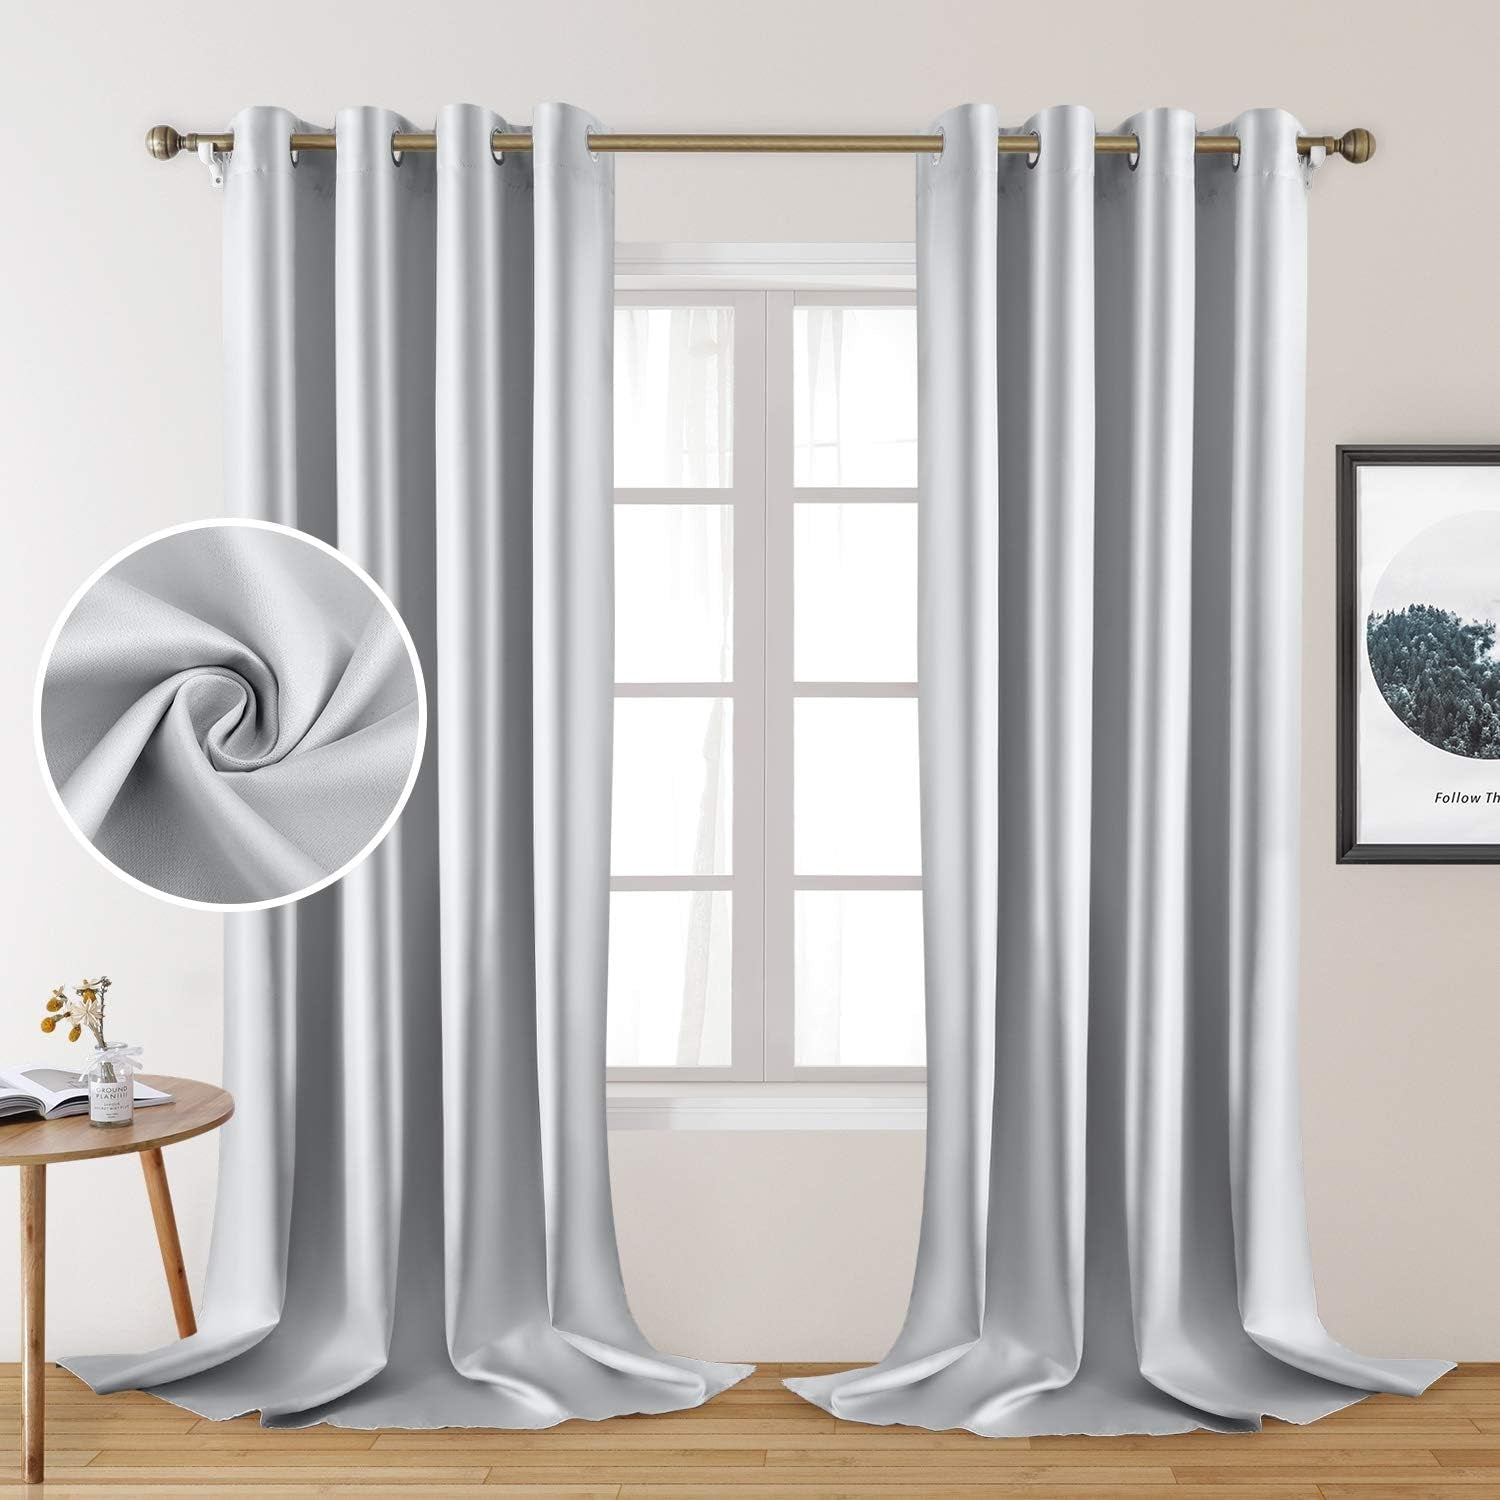 HOMEIDEAS Gold Blackout Curtains, Faux Silk for Bedroom 52 X 84 Inch Room Darkening Satin Thermal Insulated Drapes for Window, Indoor, Living Room, 2 Panels  HOMEIDEAS Greyish White 52" X 108" 